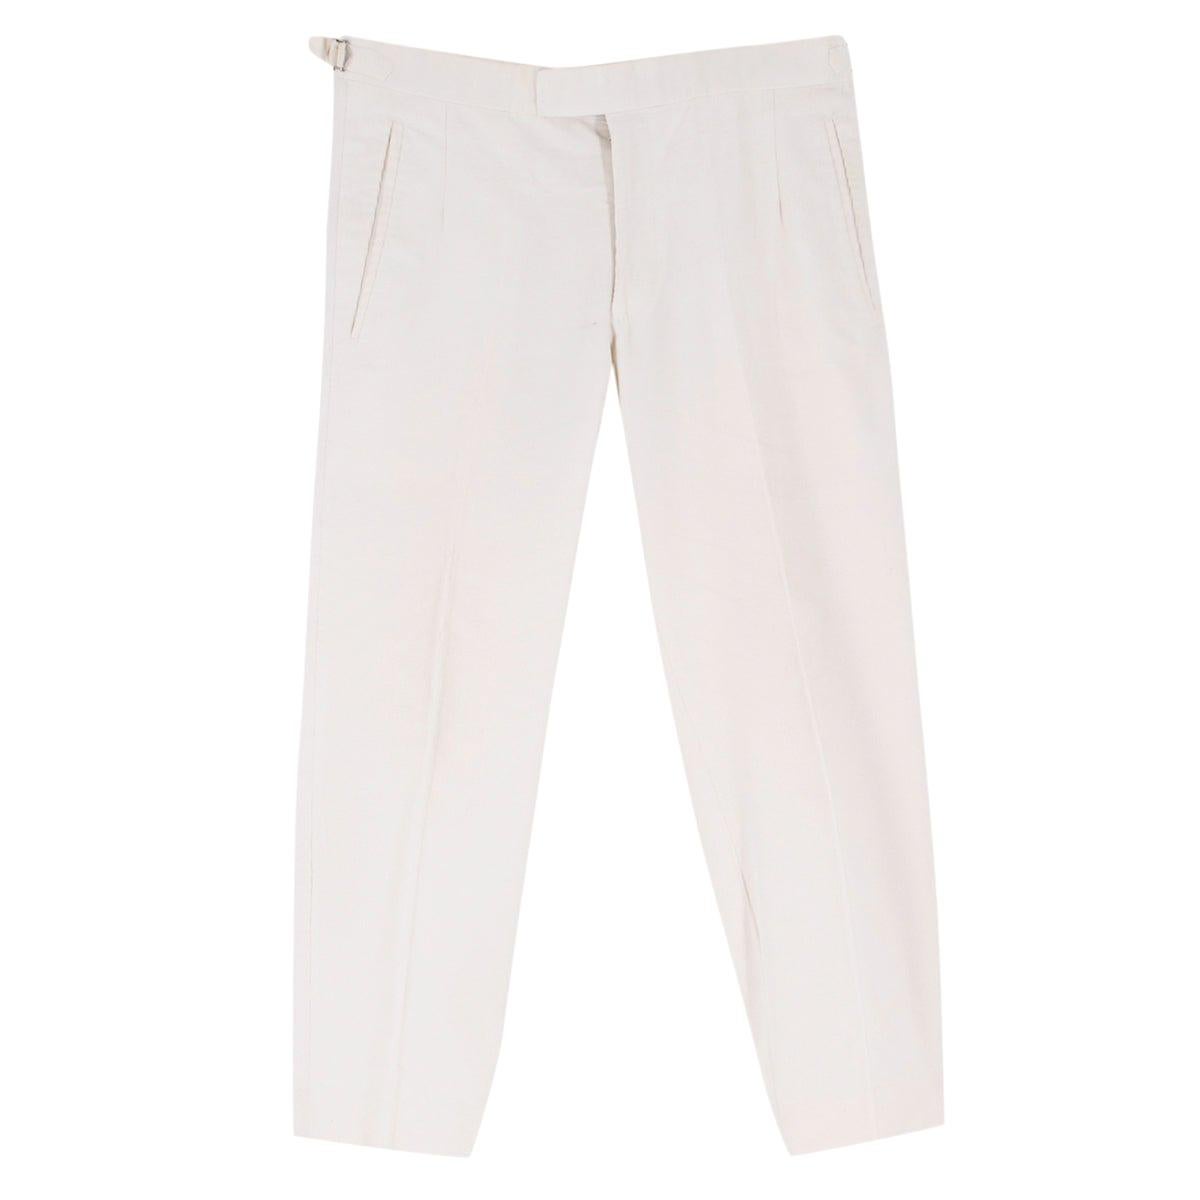 Hardy Amies white corduroy trousers estimated size XL For Sale